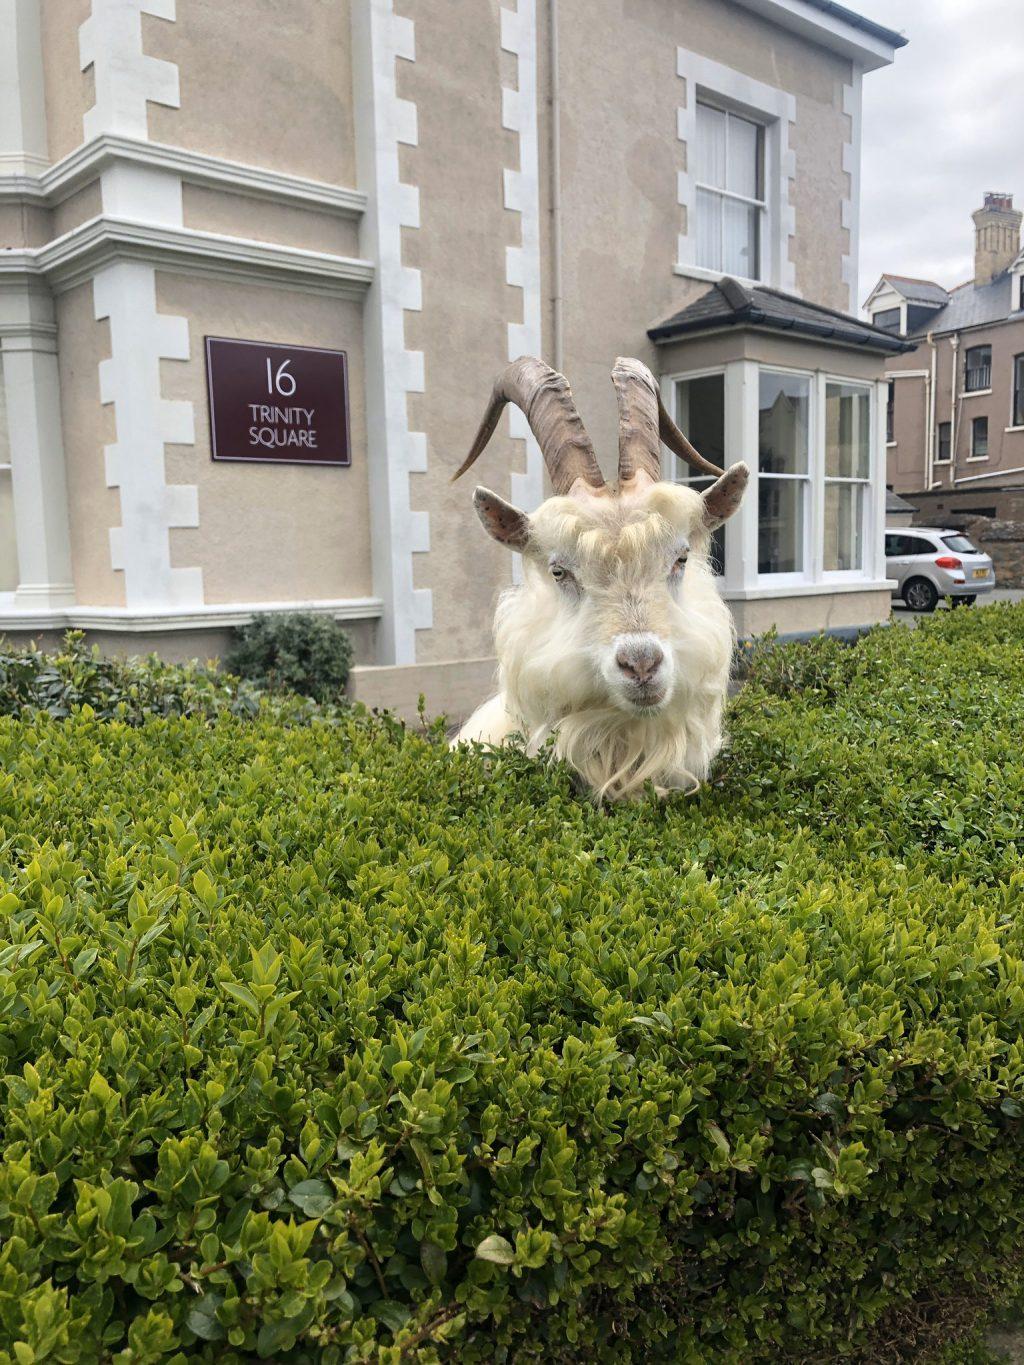 A goat pops out of a hedge in northern Wales, where a herd of 122 Kashmiri goats have taken over a small town. Andrew Stuart, journalist for the Manchester Evening News and now self-proclaimed "goat correspondent" — per his Twitter bio — took the above photo with the caption, "I, for one, welcome our goat overlords." Photo courtesy of Andrew Stuart, Twitter